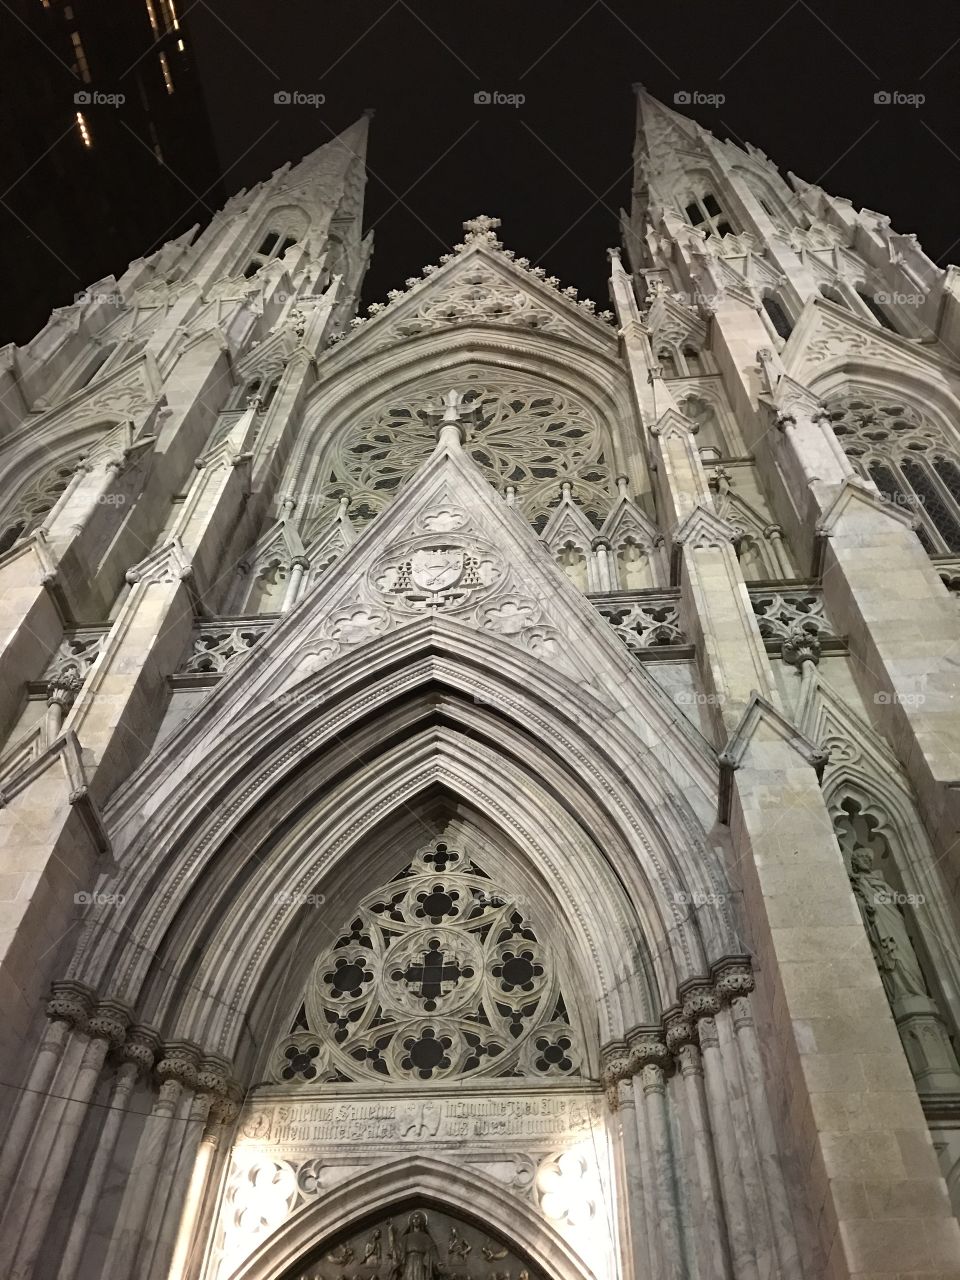 St. Patrick's cathedral 